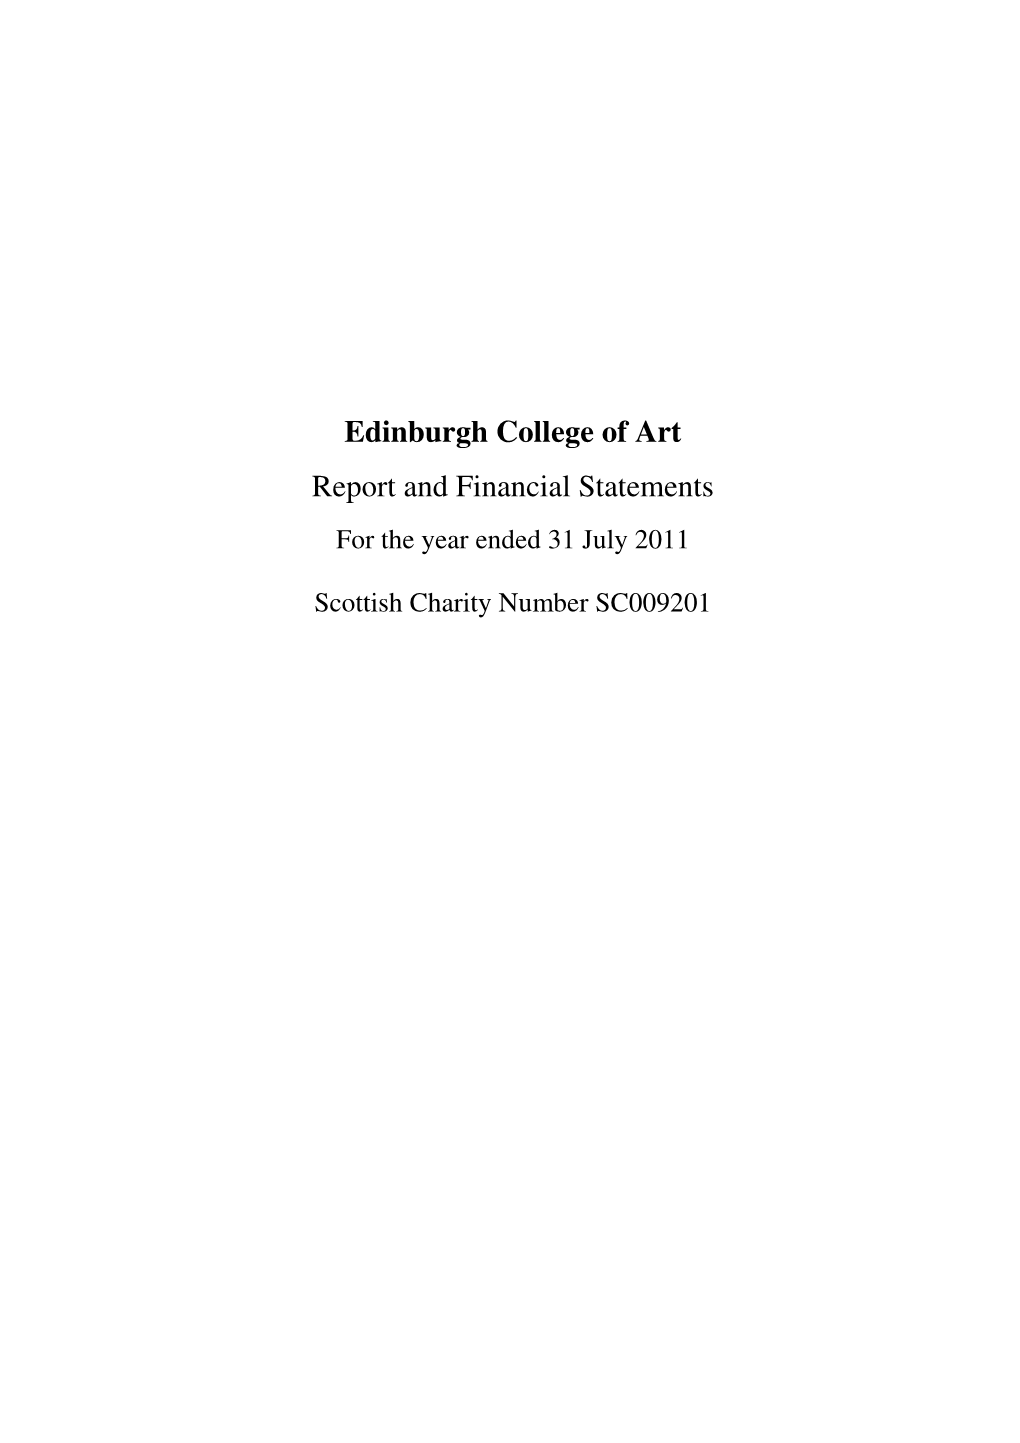 Edinburgh College of Art Report and Financial Statements 2010-2011 1